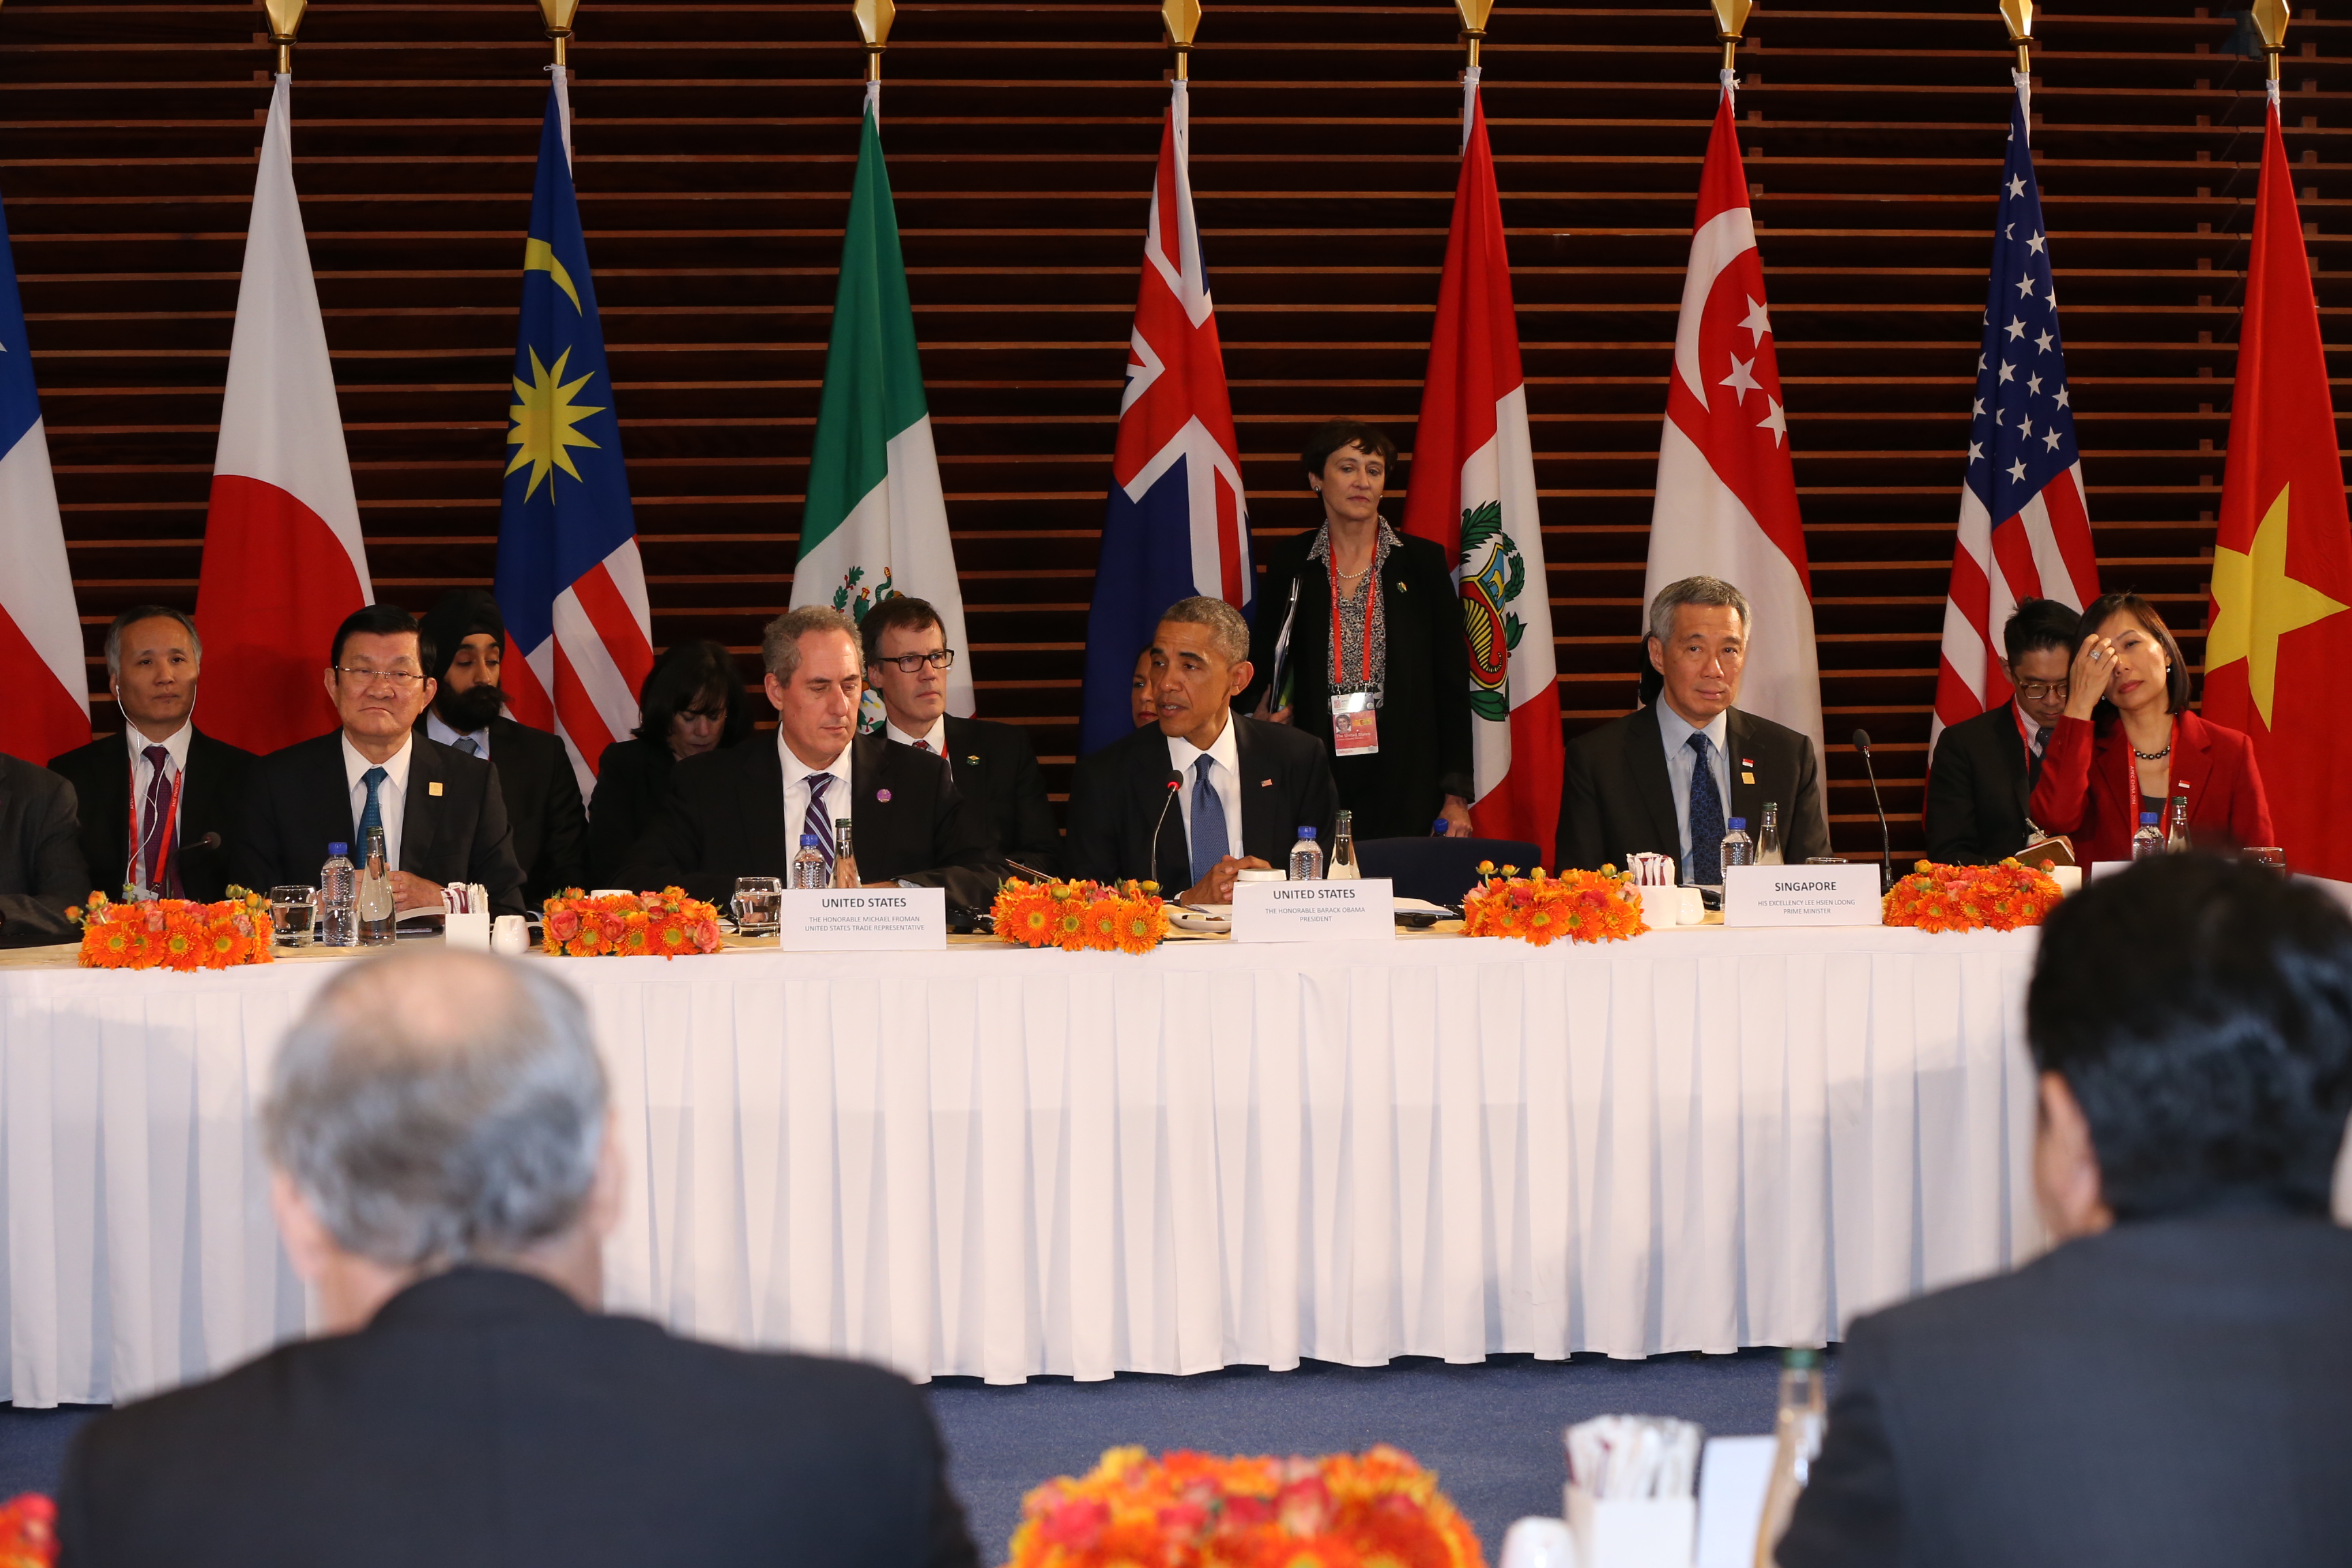 Prime Minister Lee Hsien Loong at the 22nd Asia-Pacific Economic Cooperation (APEC) Economic Leaders’ Meeting (AELM) from 10 to 11 Nov 2014 in Beijing, China (MCI Photo by LH Goh) 